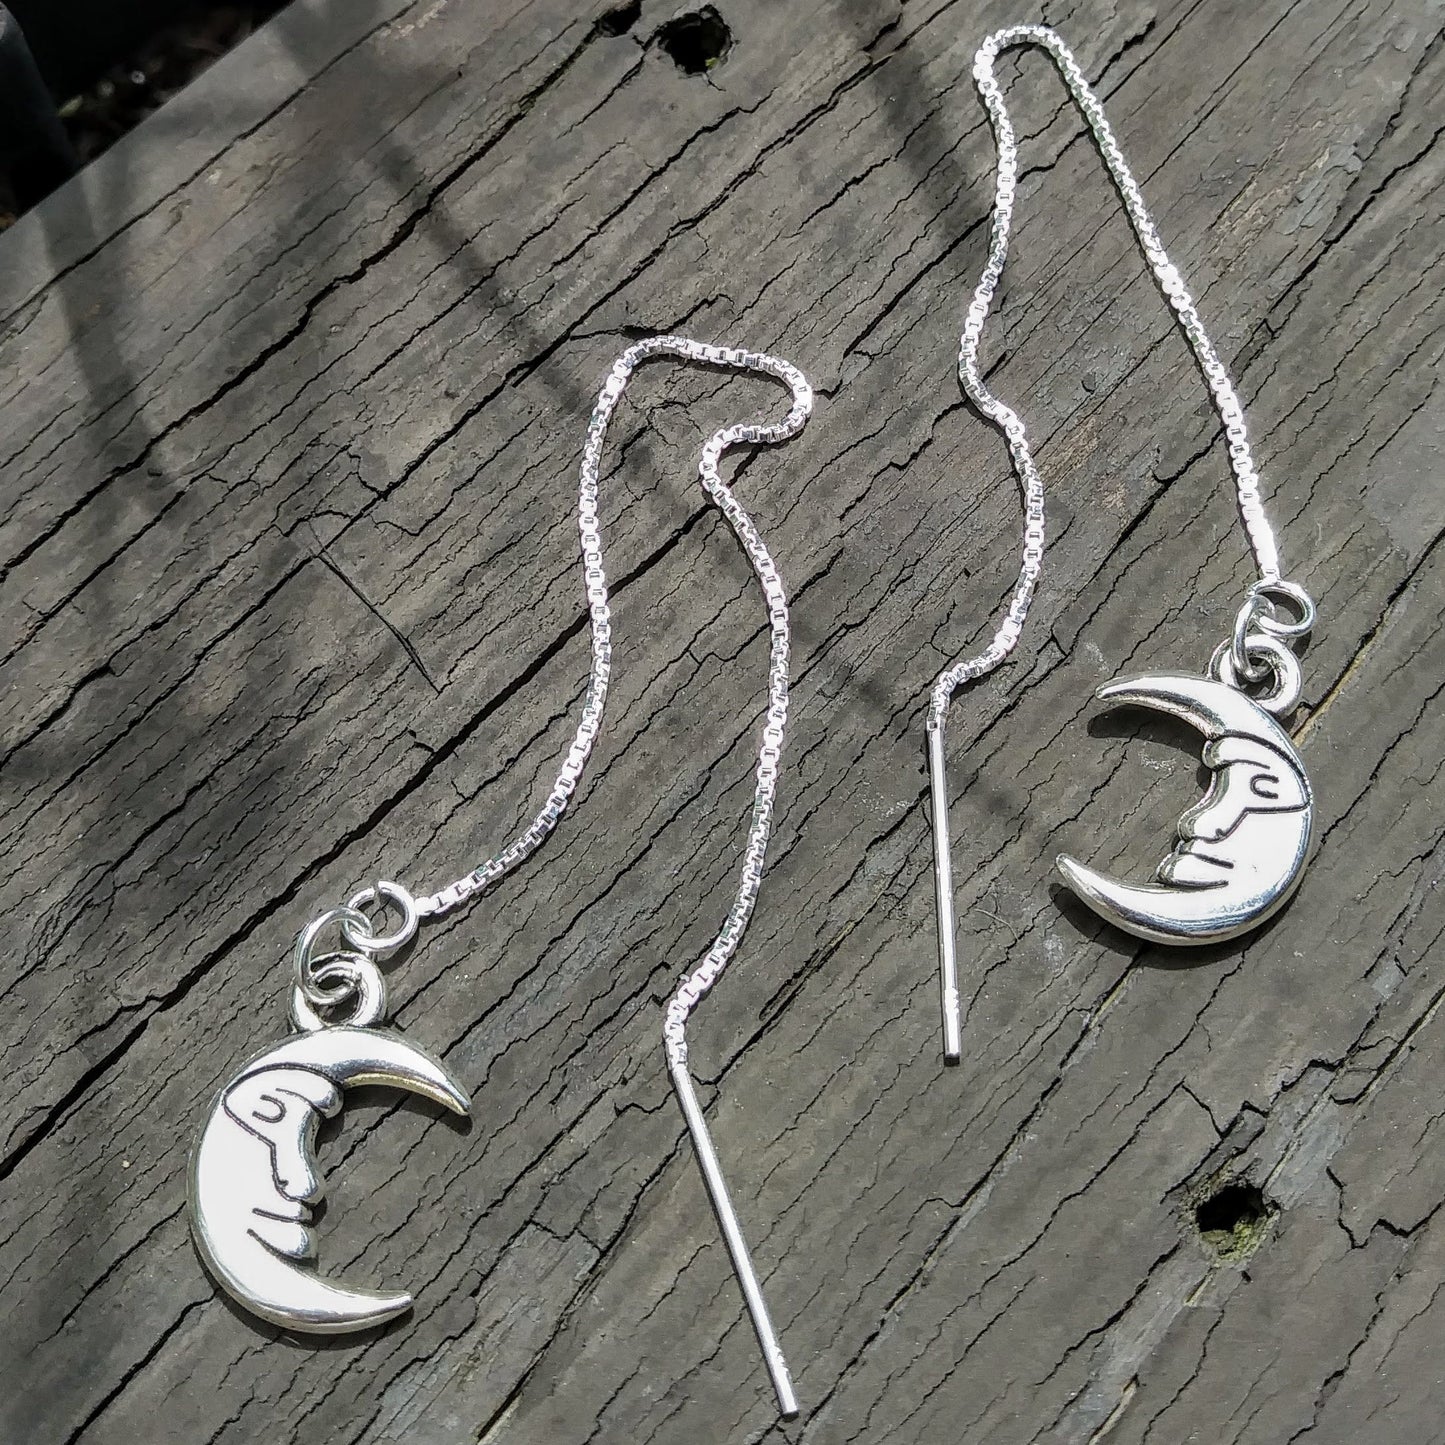 Man in the Moon Threader Earrings - 4 inch 0.925 Sterling Silver Threads